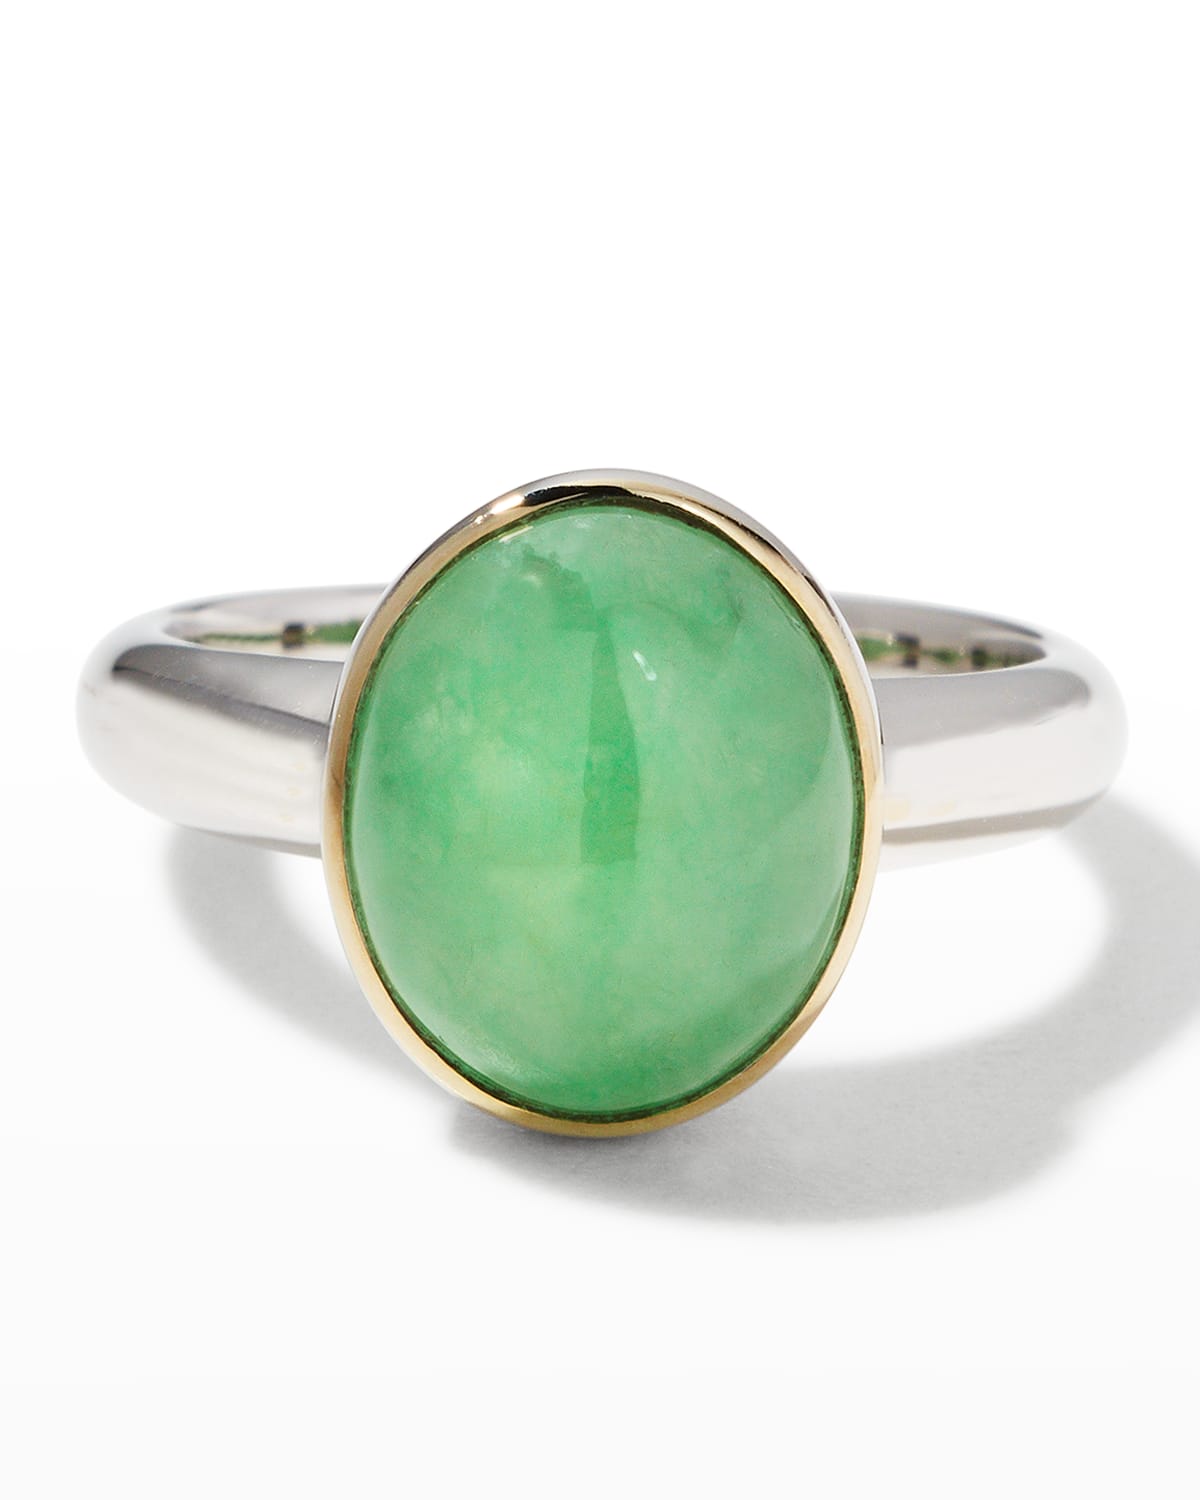 David C.A. Lin 18k White Gold Green Jadeite Oval Dome Ring, Size 6.5